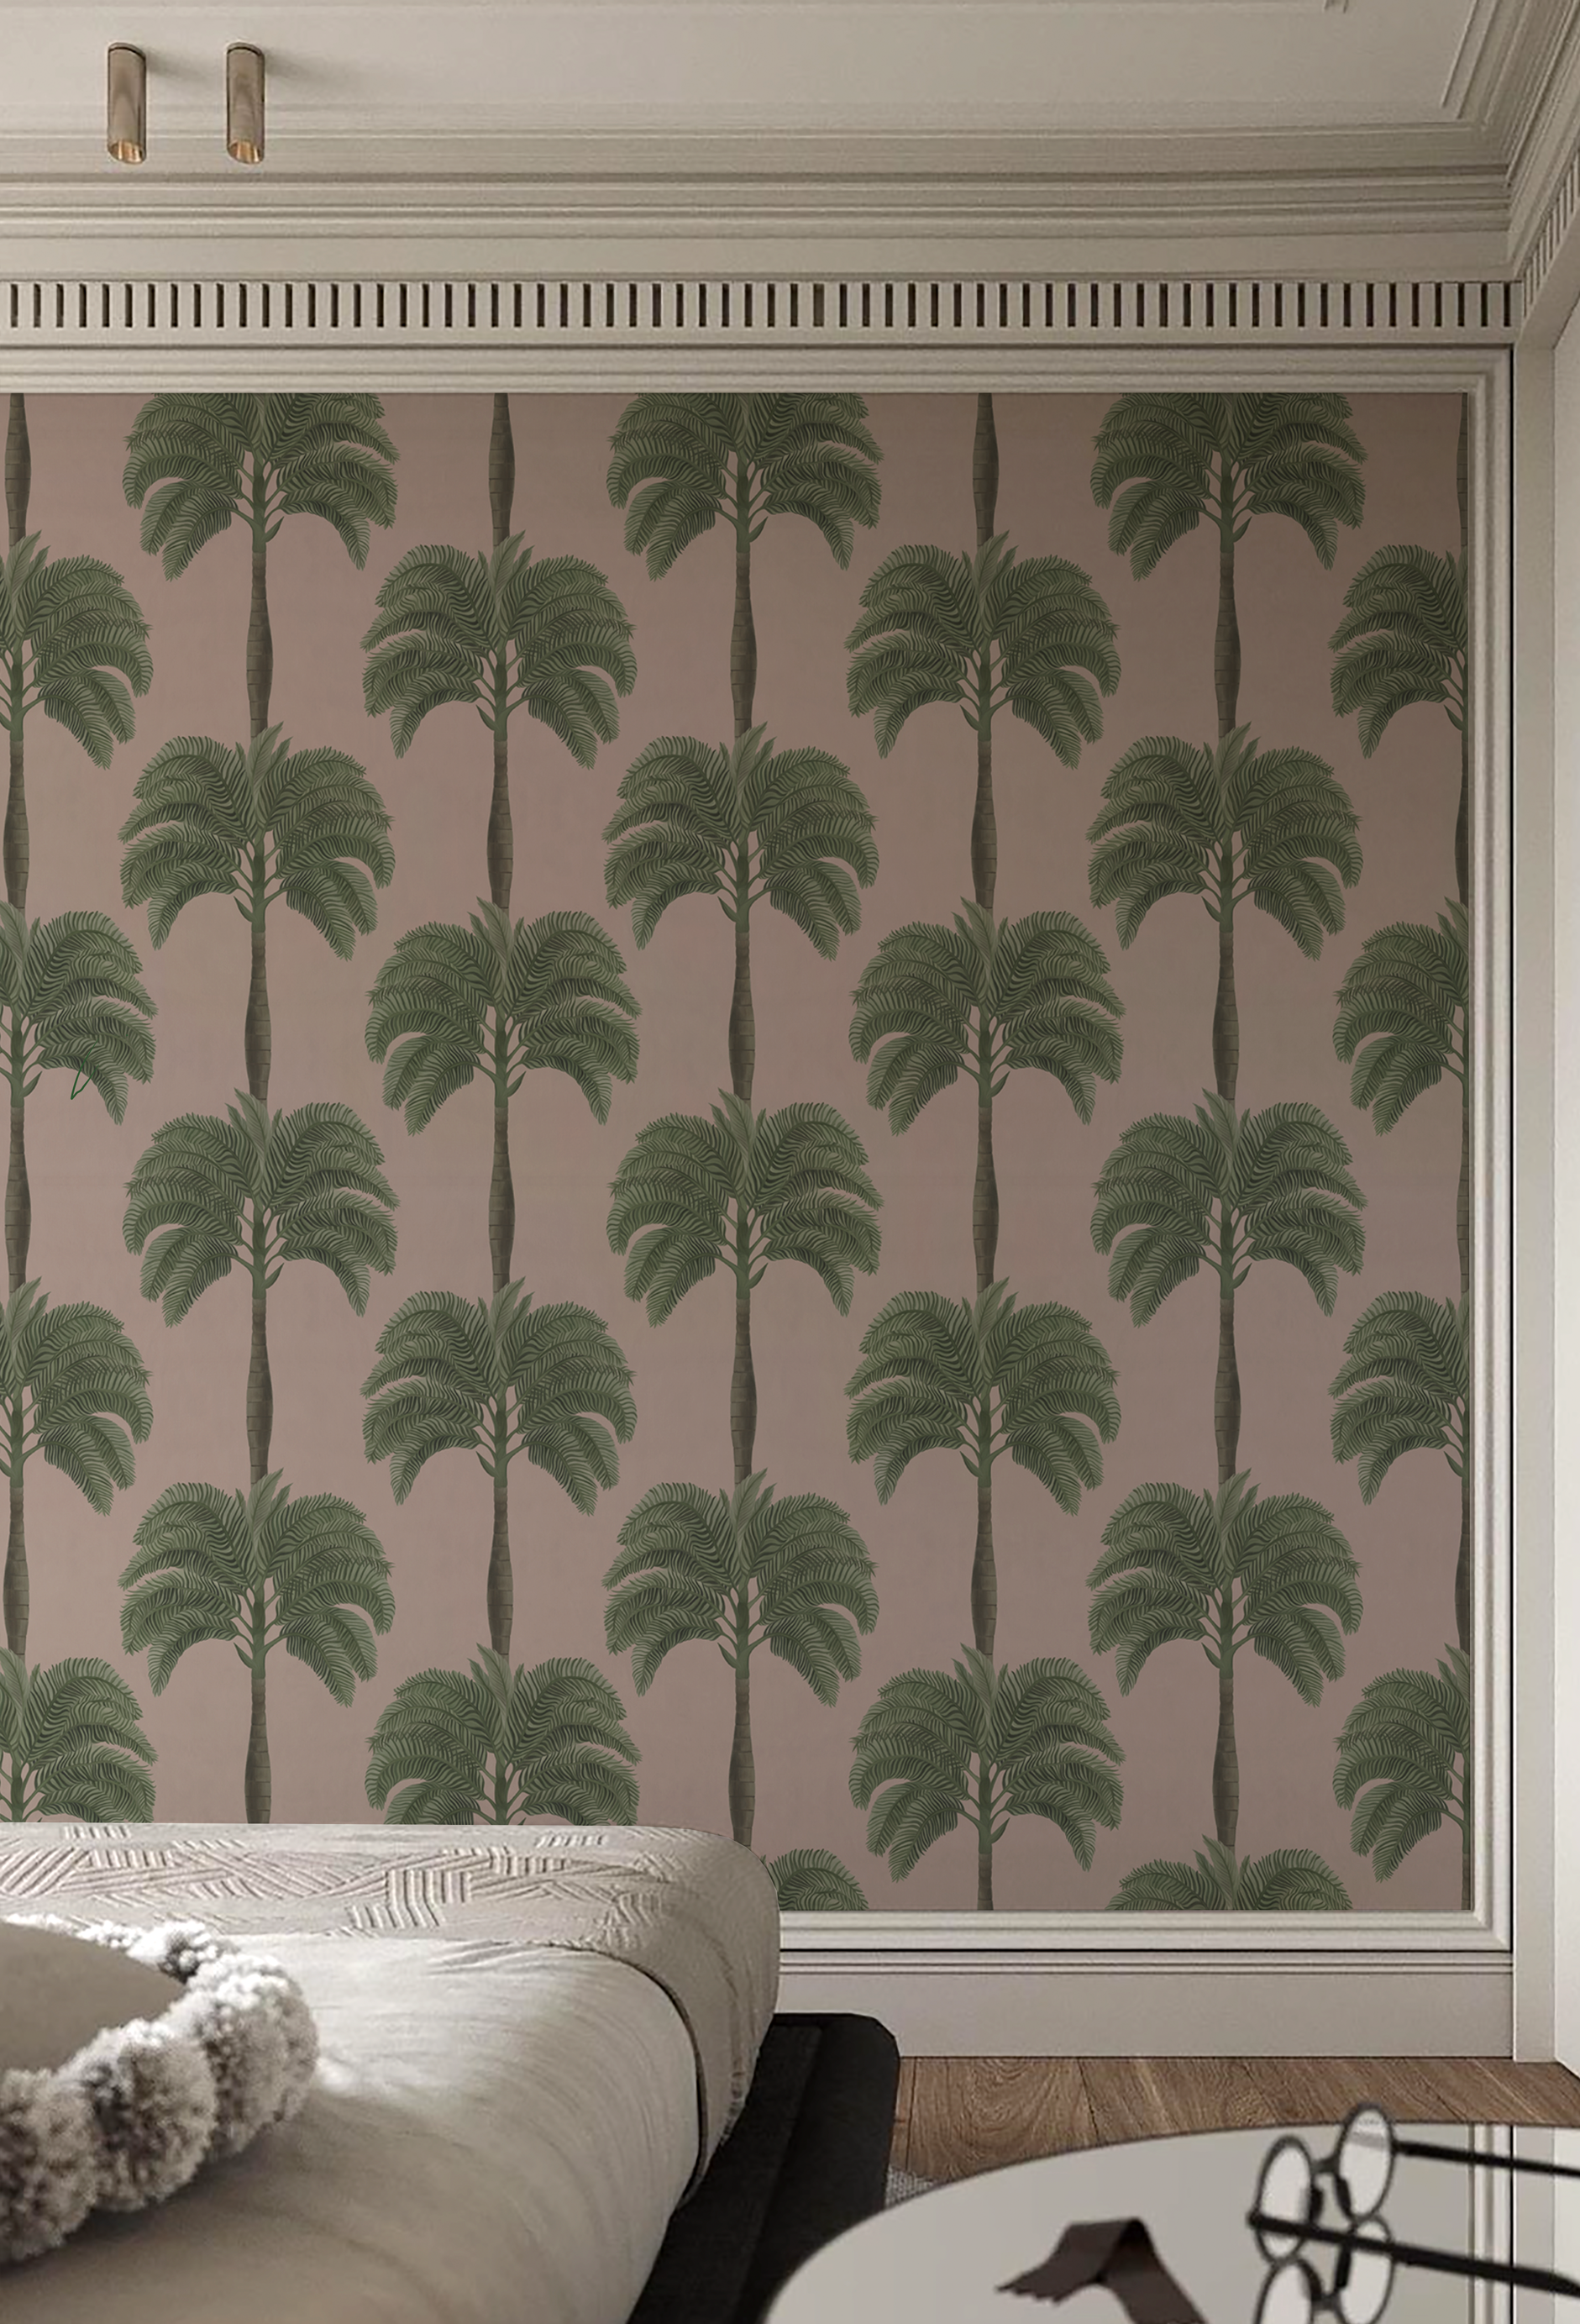 Palma in Flamingo Wallpaper by Deus ex Gardina in a modern bedroom with palm tree patterned wallpaper with pink ground. Photo by HDM2 Architects.